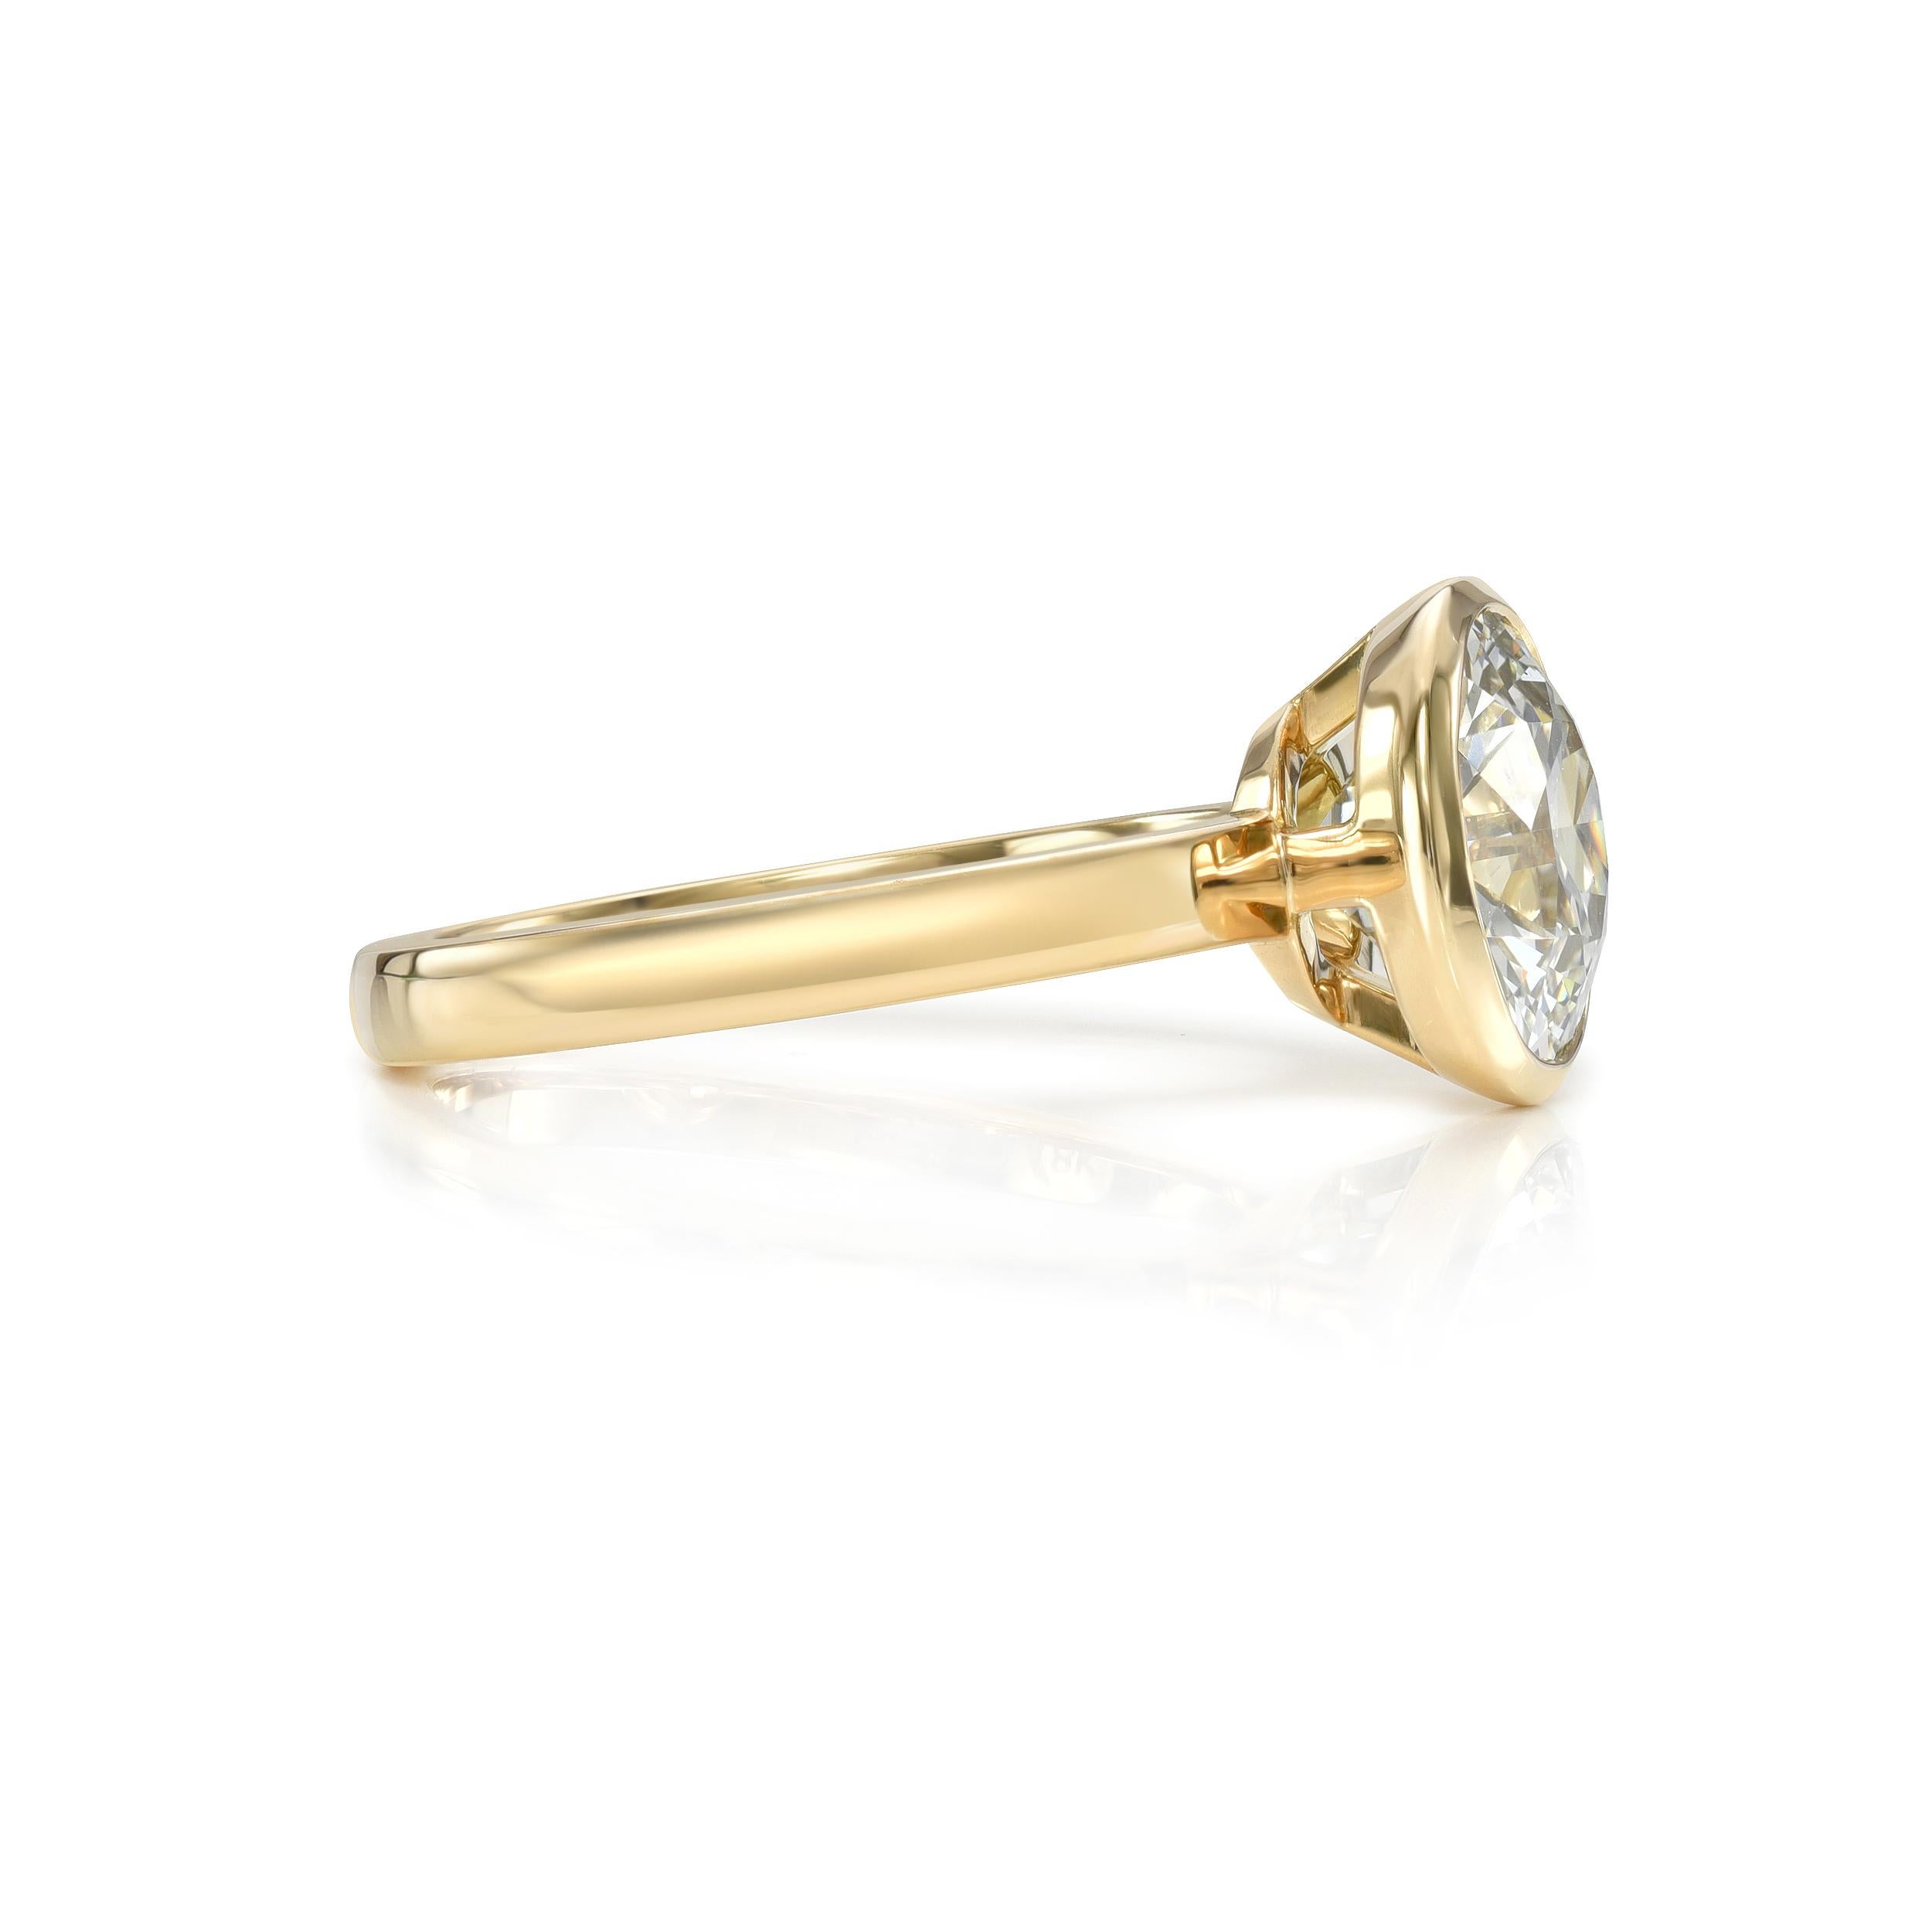 2.48ct L/SI1 GIA certified old European cut diamond bezel set in a handcrafted 18K yellow gold mounting.